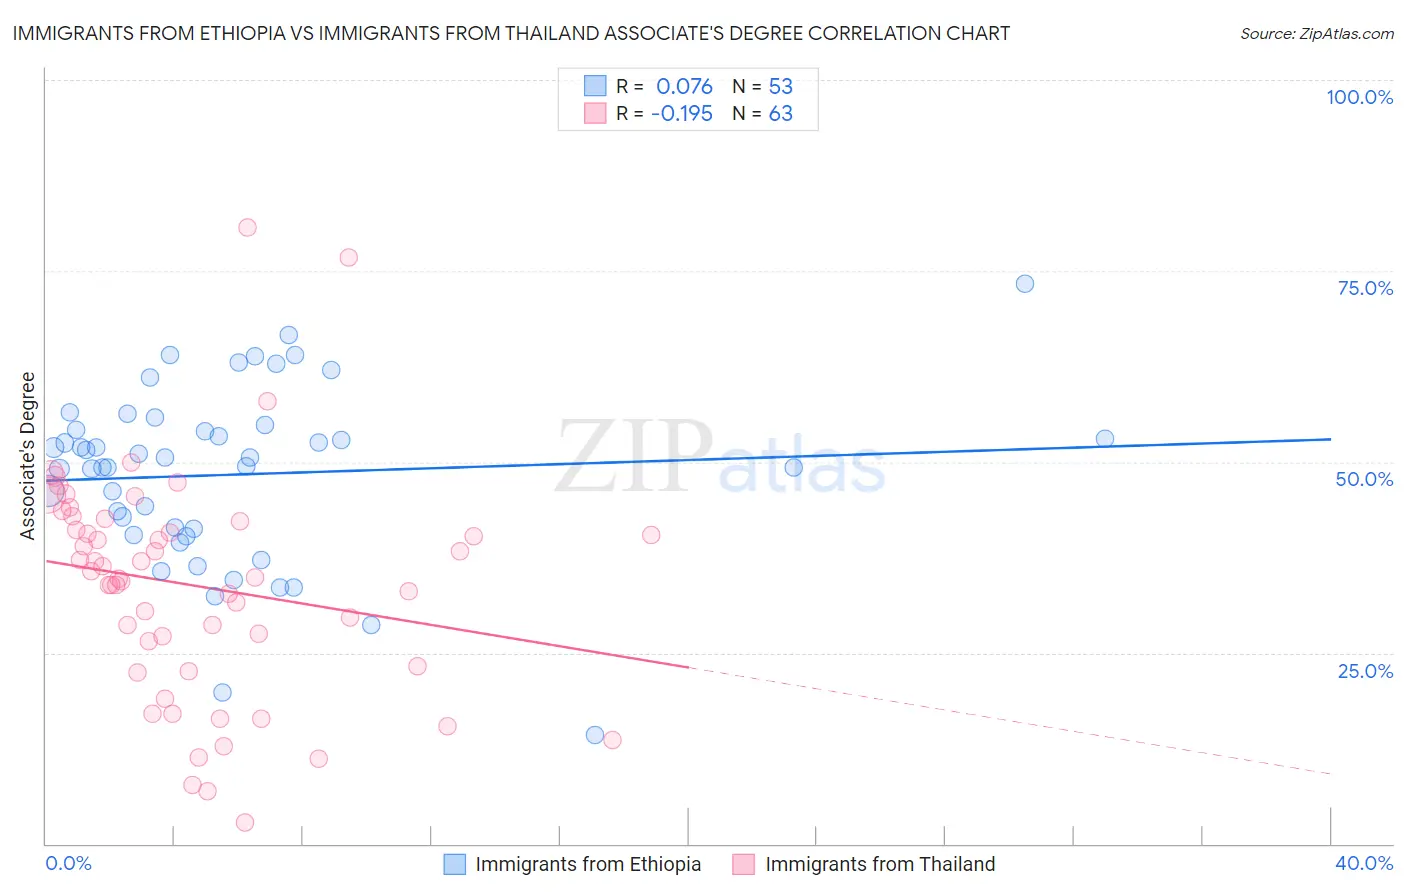 Immigrants from Ethiopia vs Immigrants from Thailand Associate's Degree